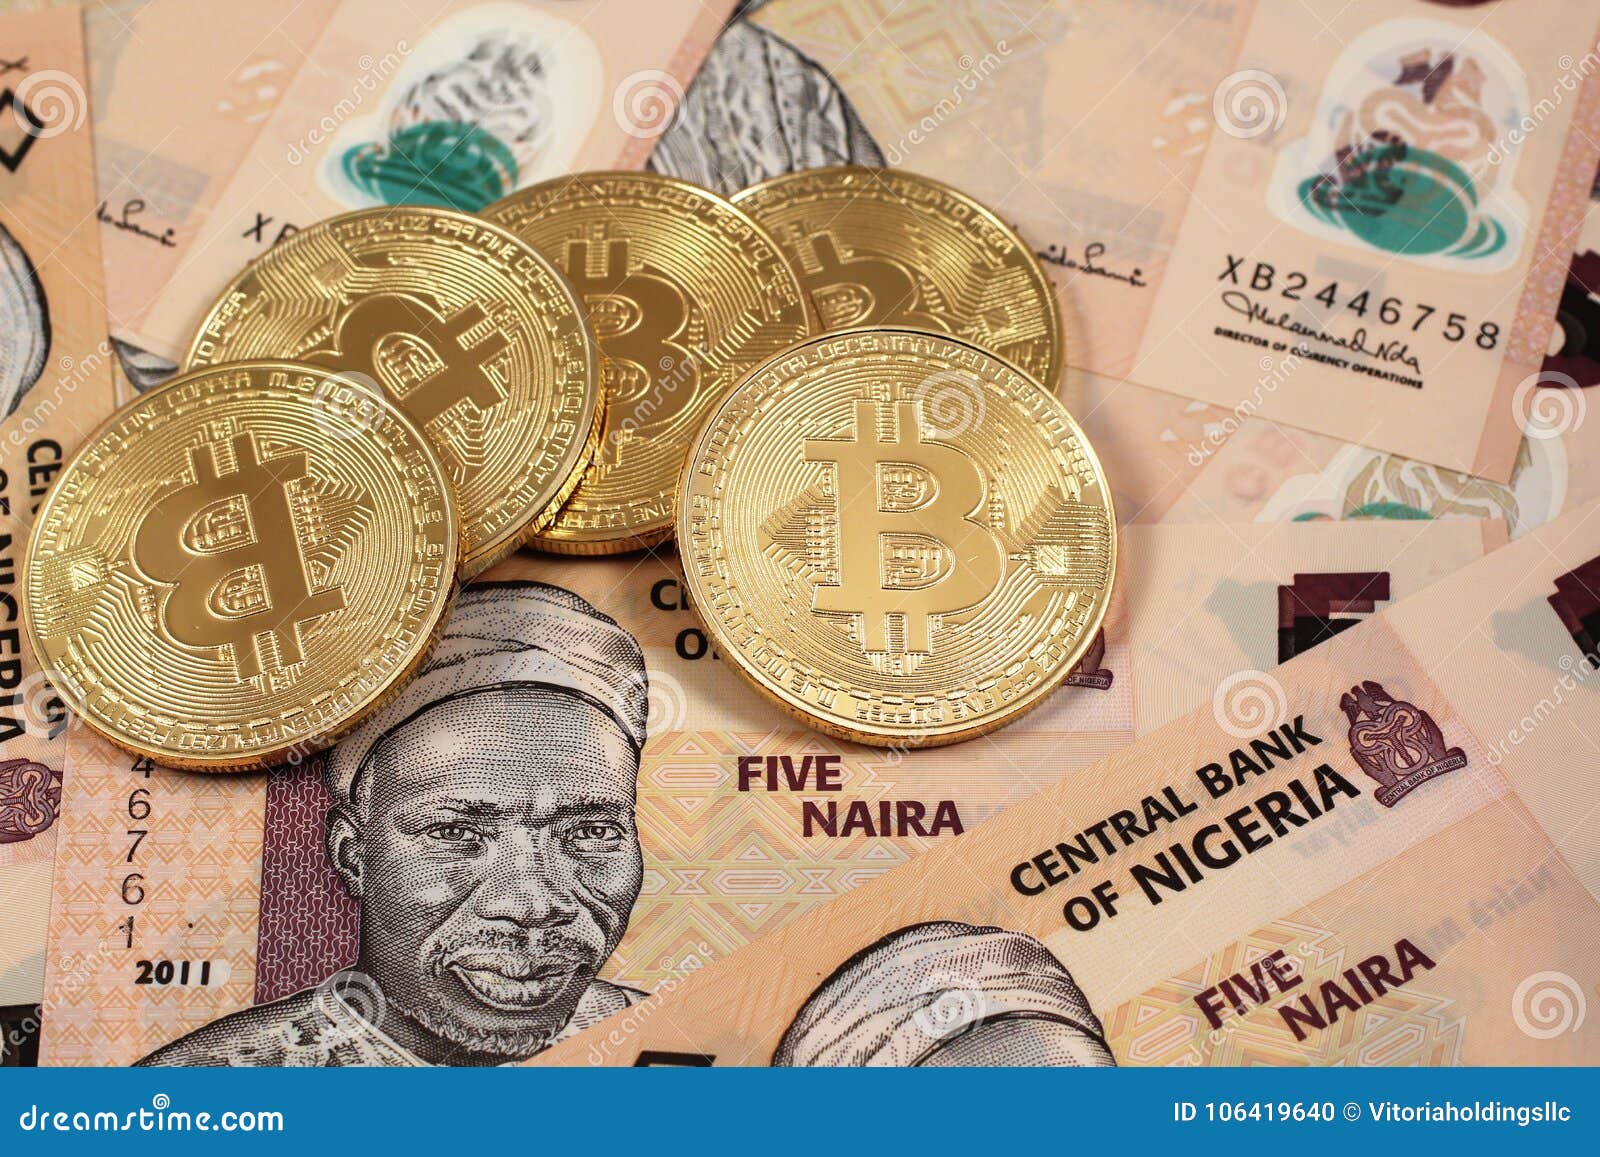 Nigerian Naira (NGN) Price to USD - Live Value Today | Coinranking